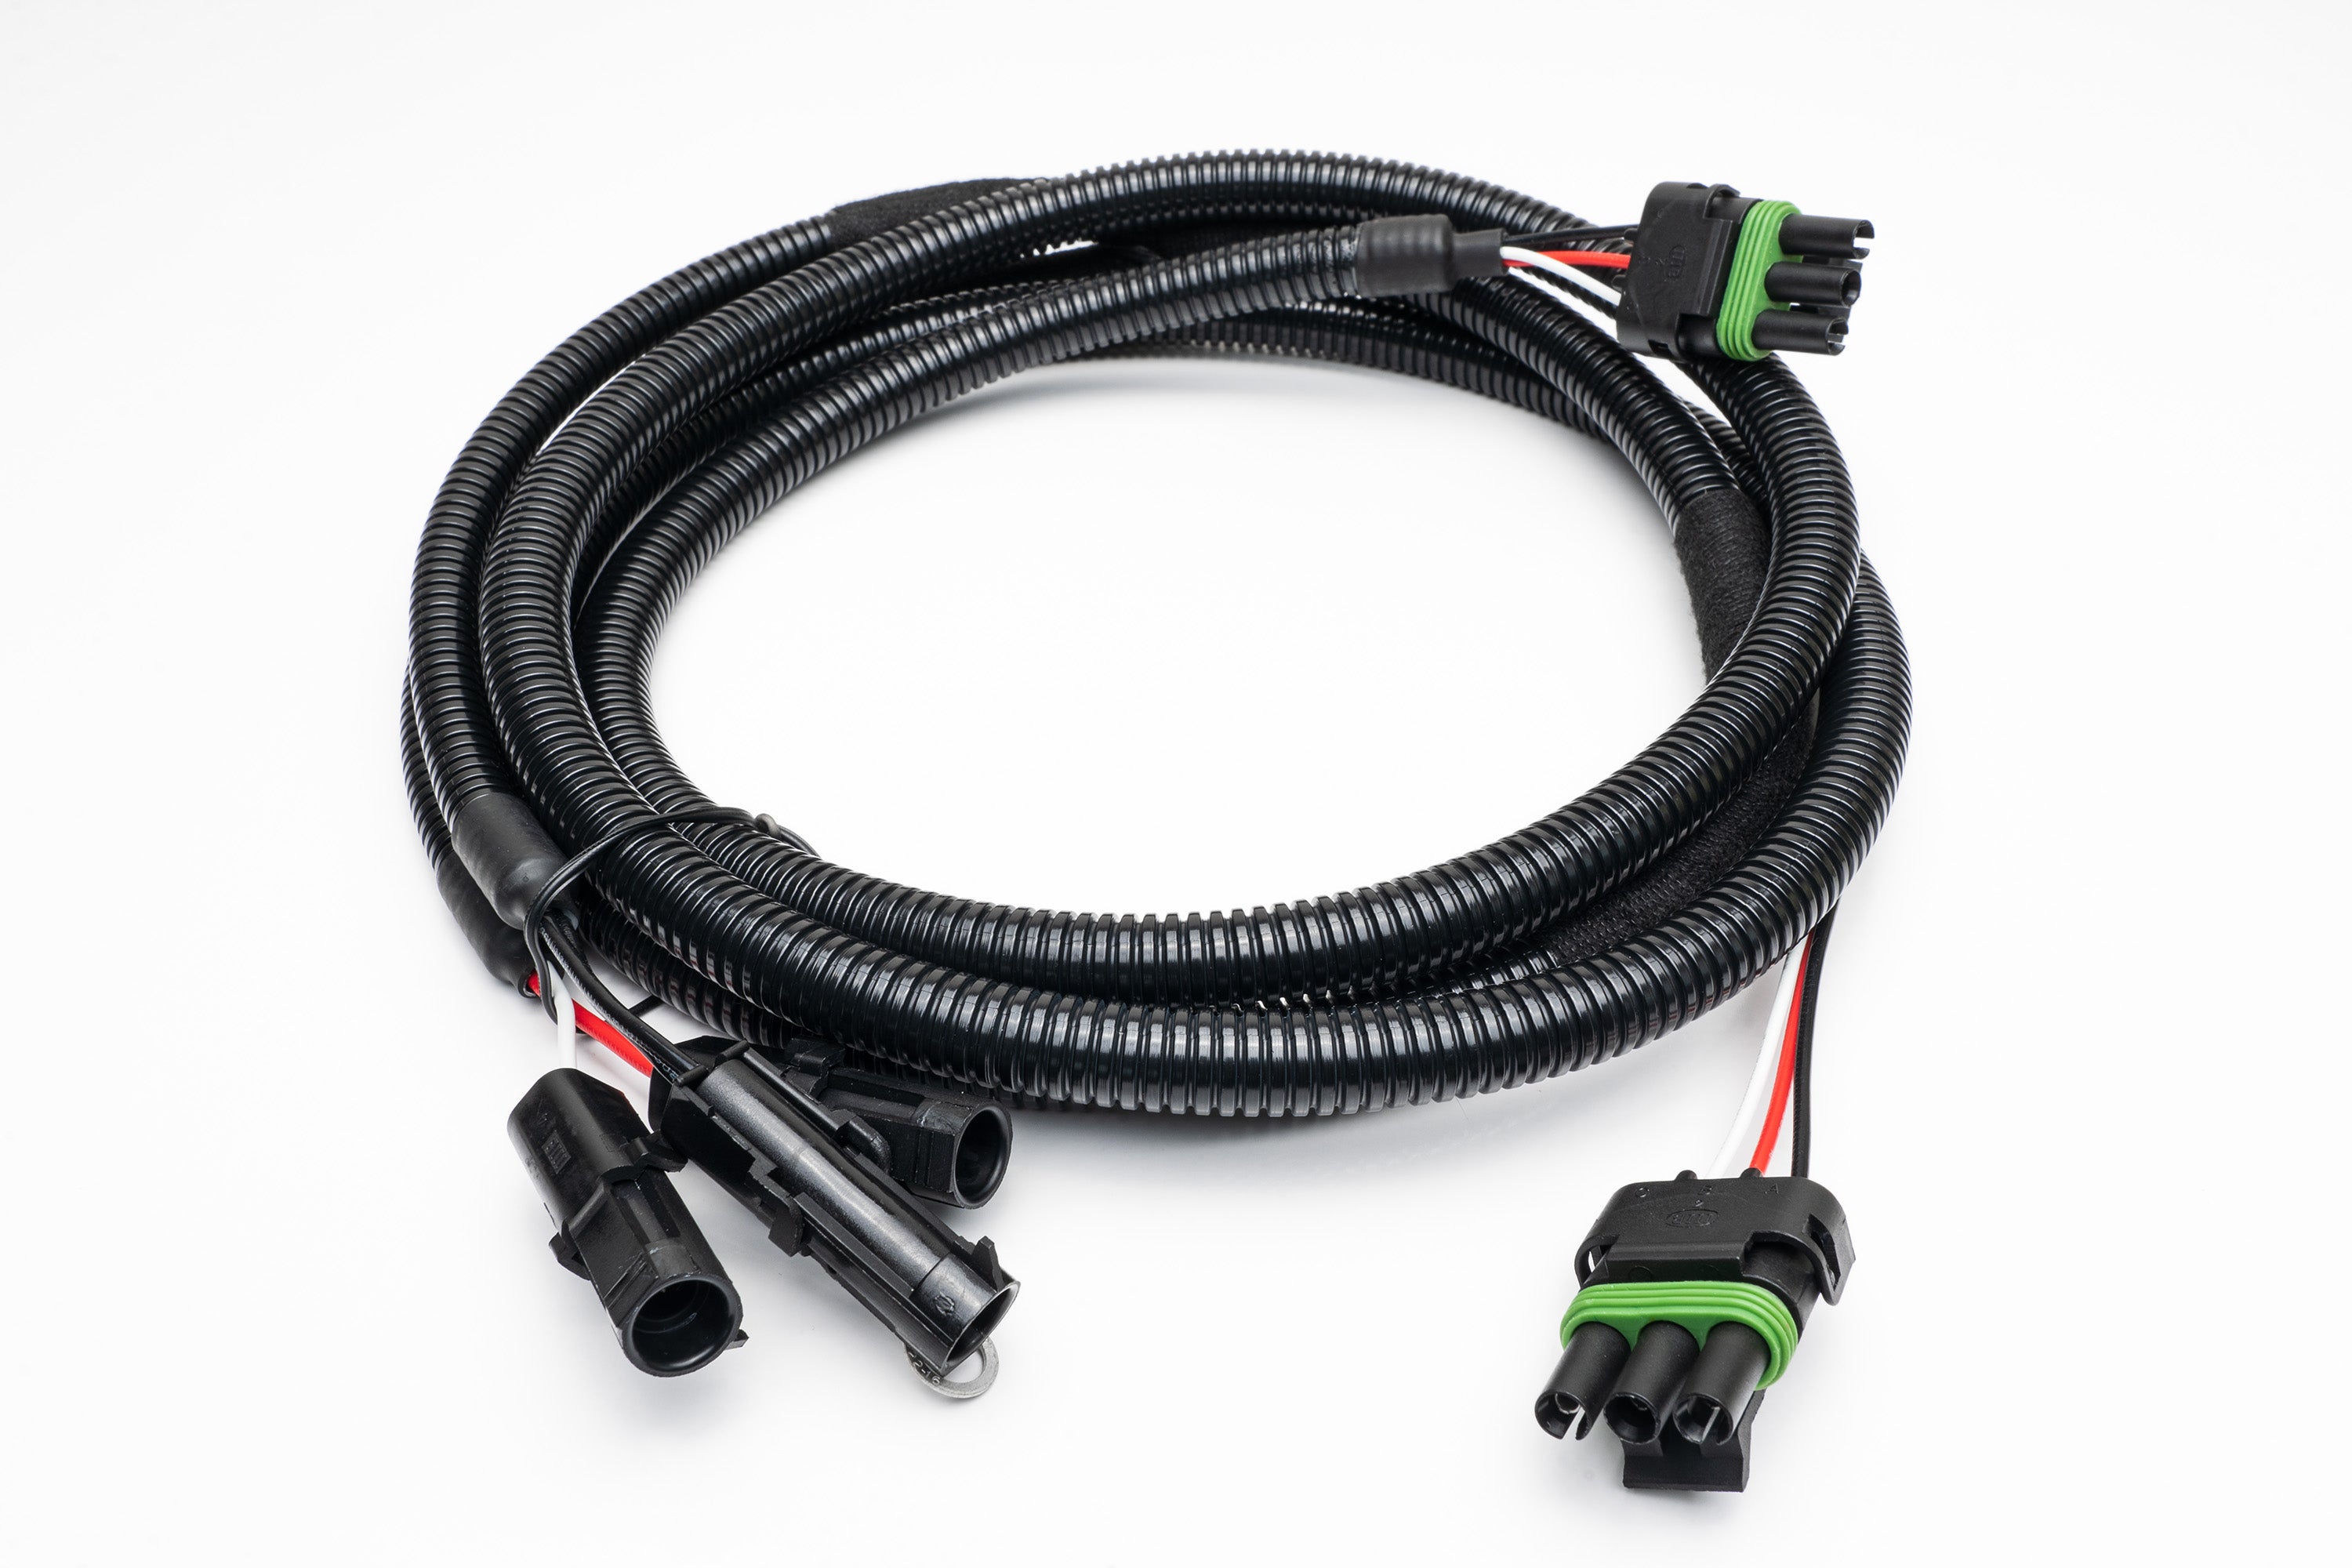 SPV Parts Harness System - Harnesses, Adapters & Components